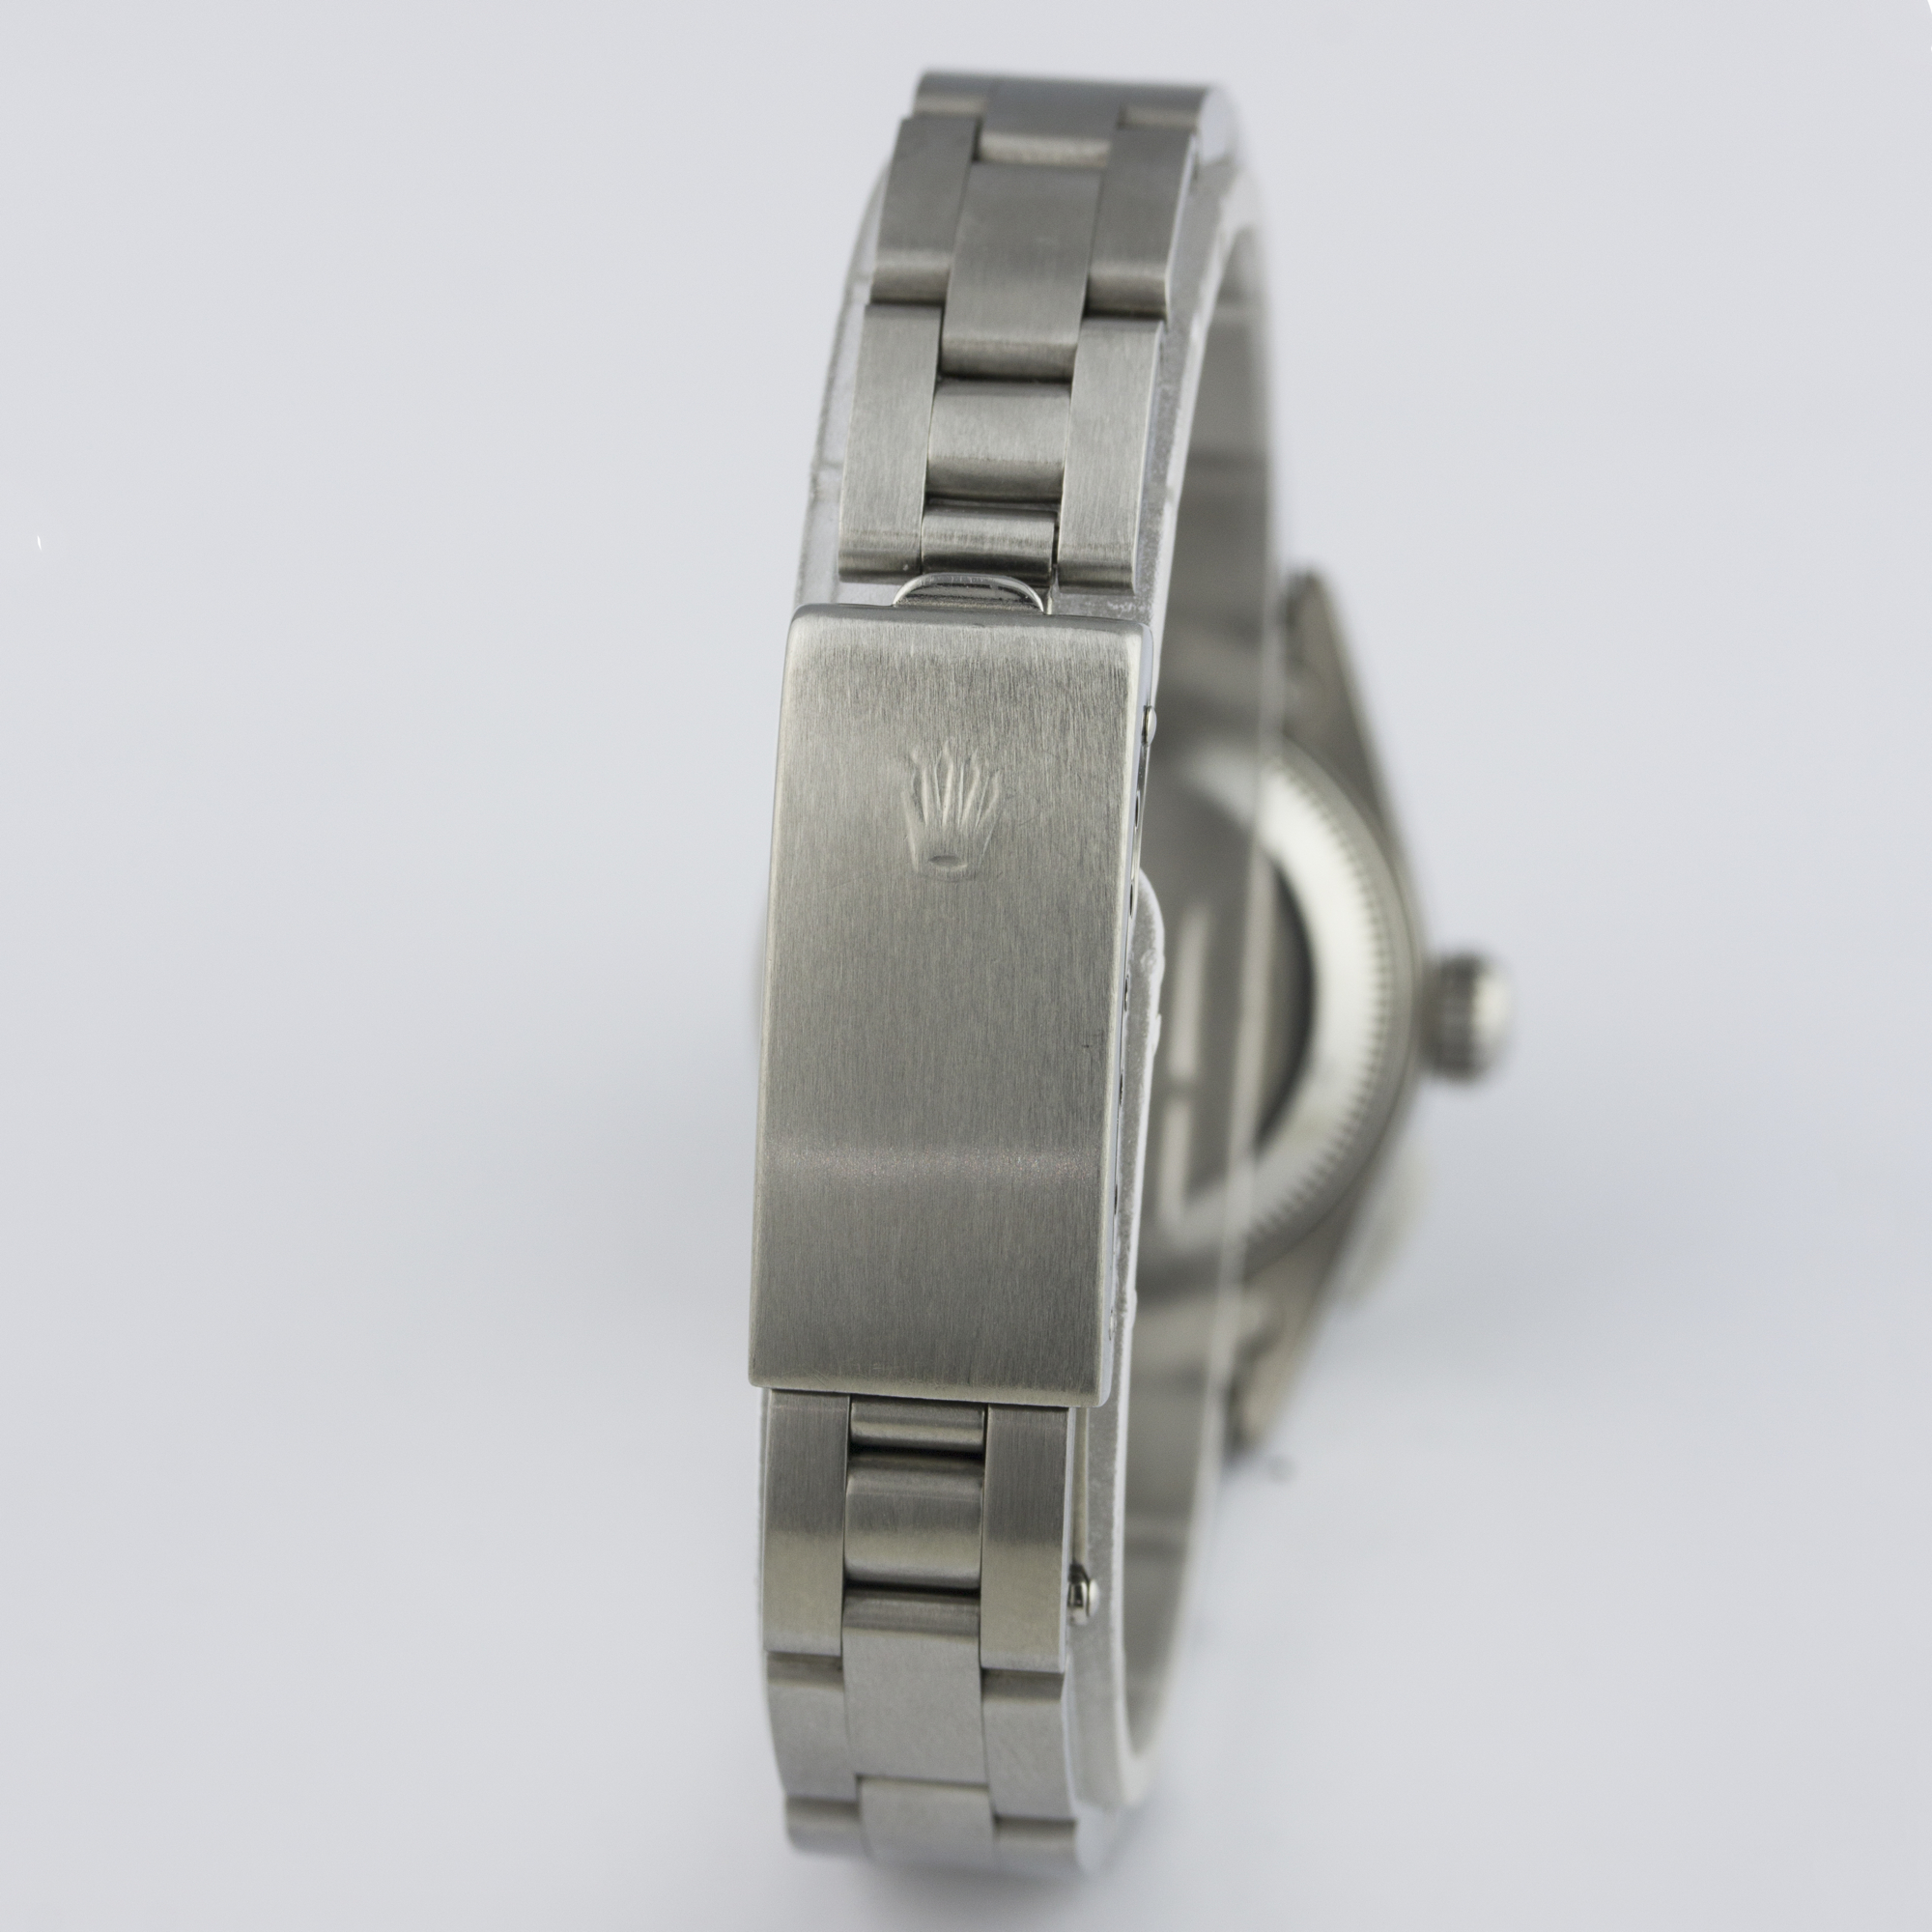 A LADIES STAINLESS STEEL ROLEX OYSTER PERPETUAL DATE BRACELET WATCH CIRCA 1993, REF. 69160 D: Silver - Image 6 of 9